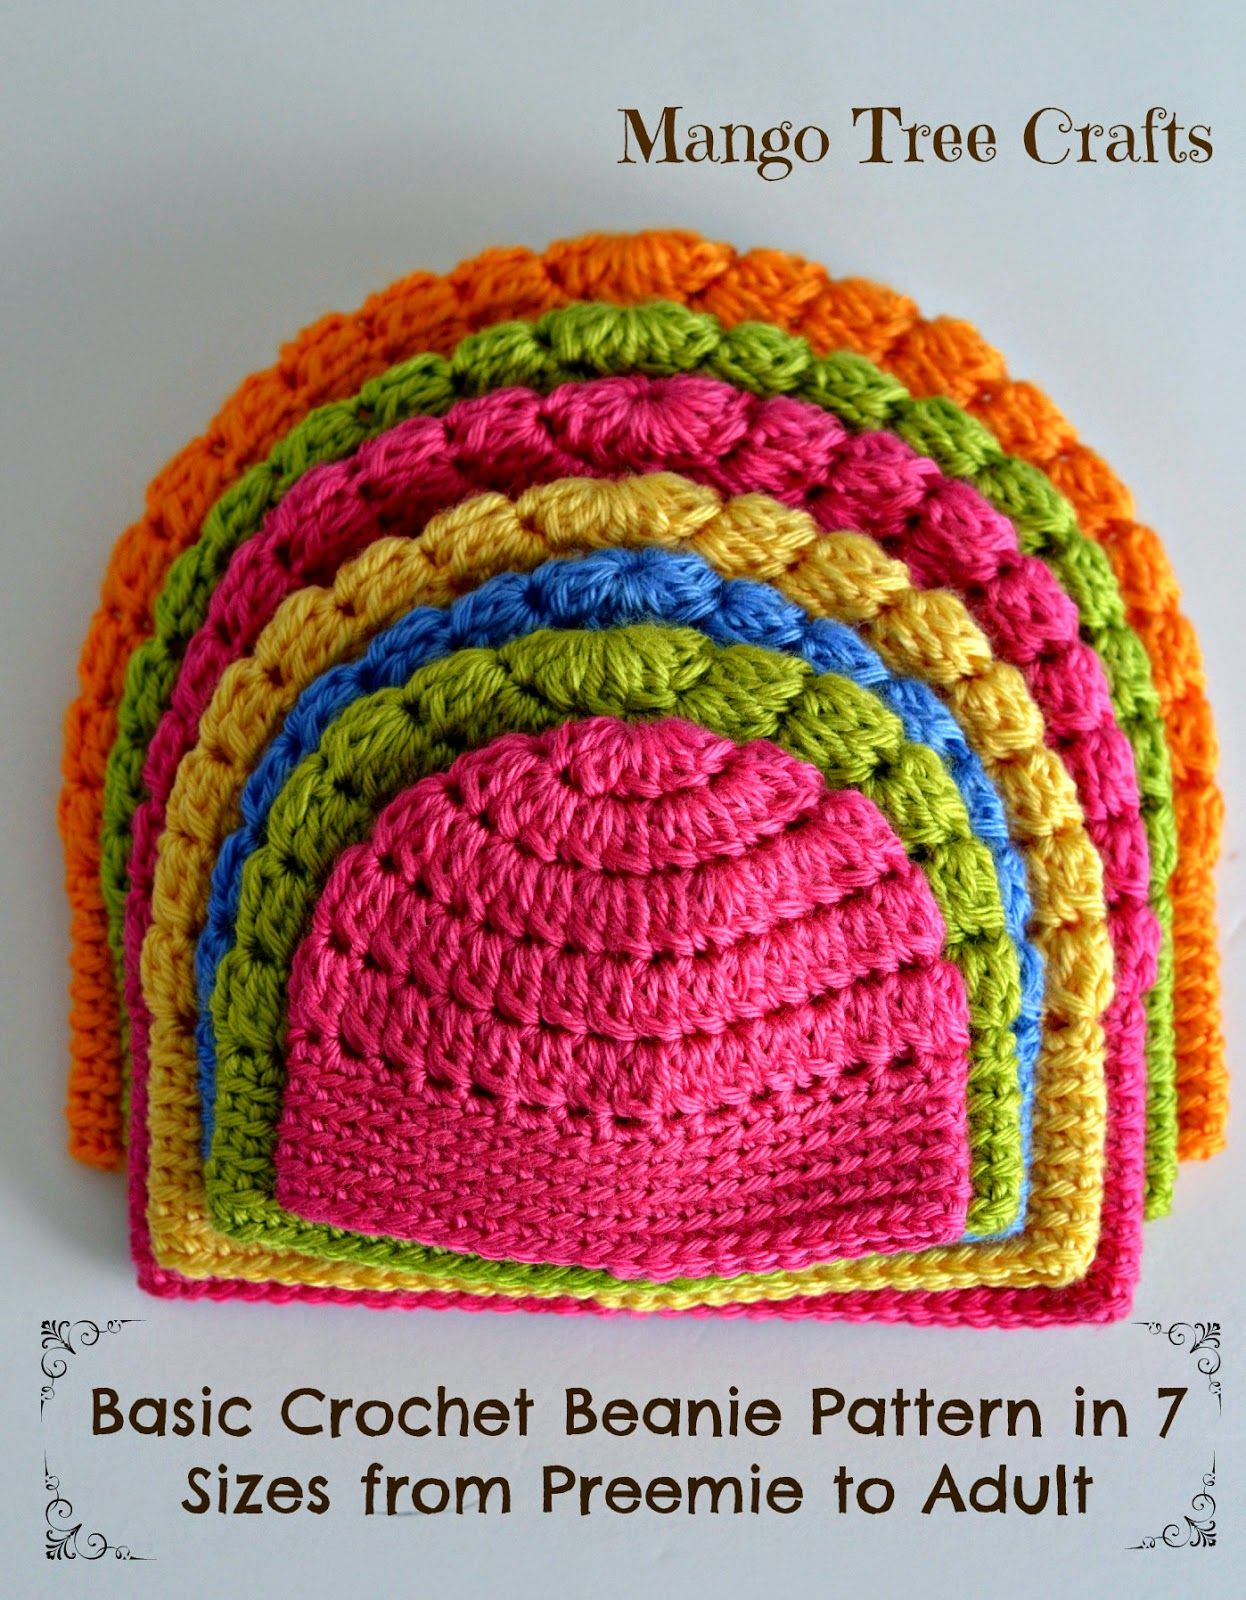 Adult Crochet Beanie Pattern Creative Knitting And Crochet Projects You Would Love Crochet